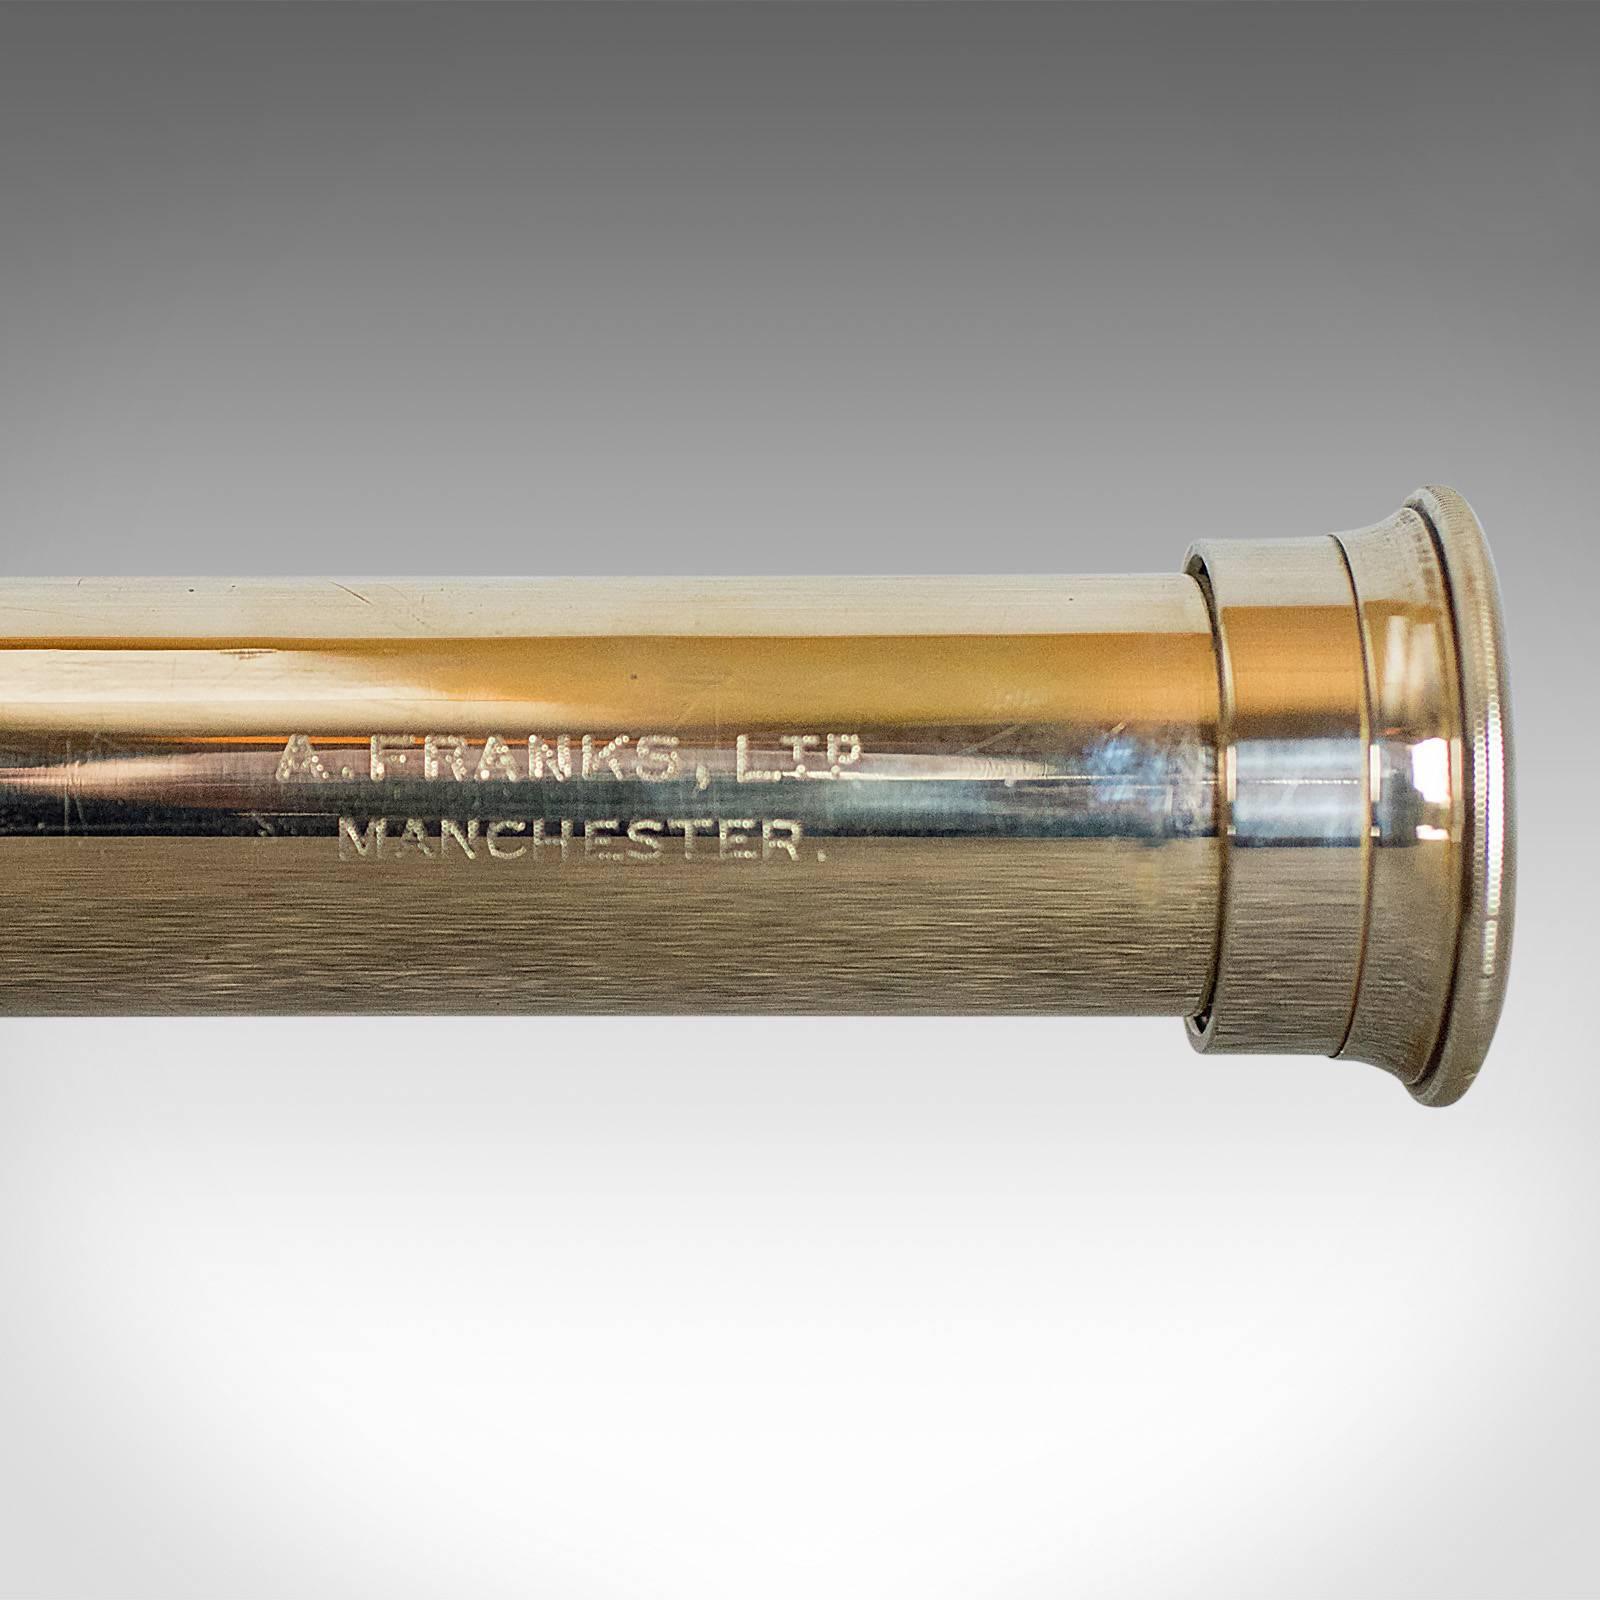 English Antique Telescope, a Franks Ltd, Manchester, Officer of the Watch